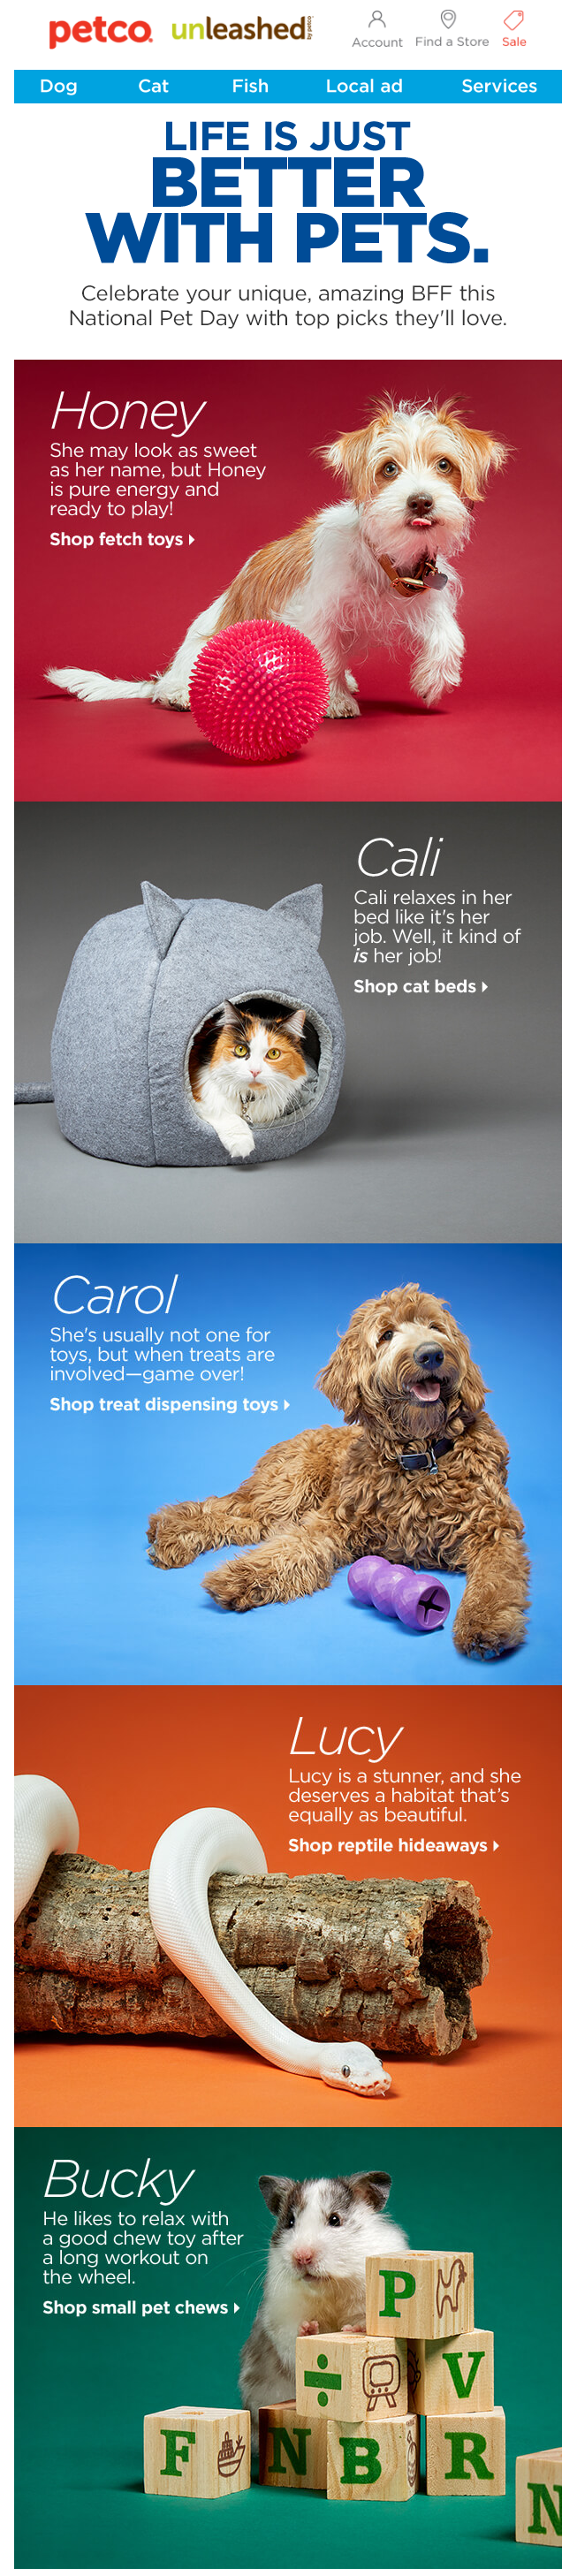 An email dedicated to Pet’s Day from Petco